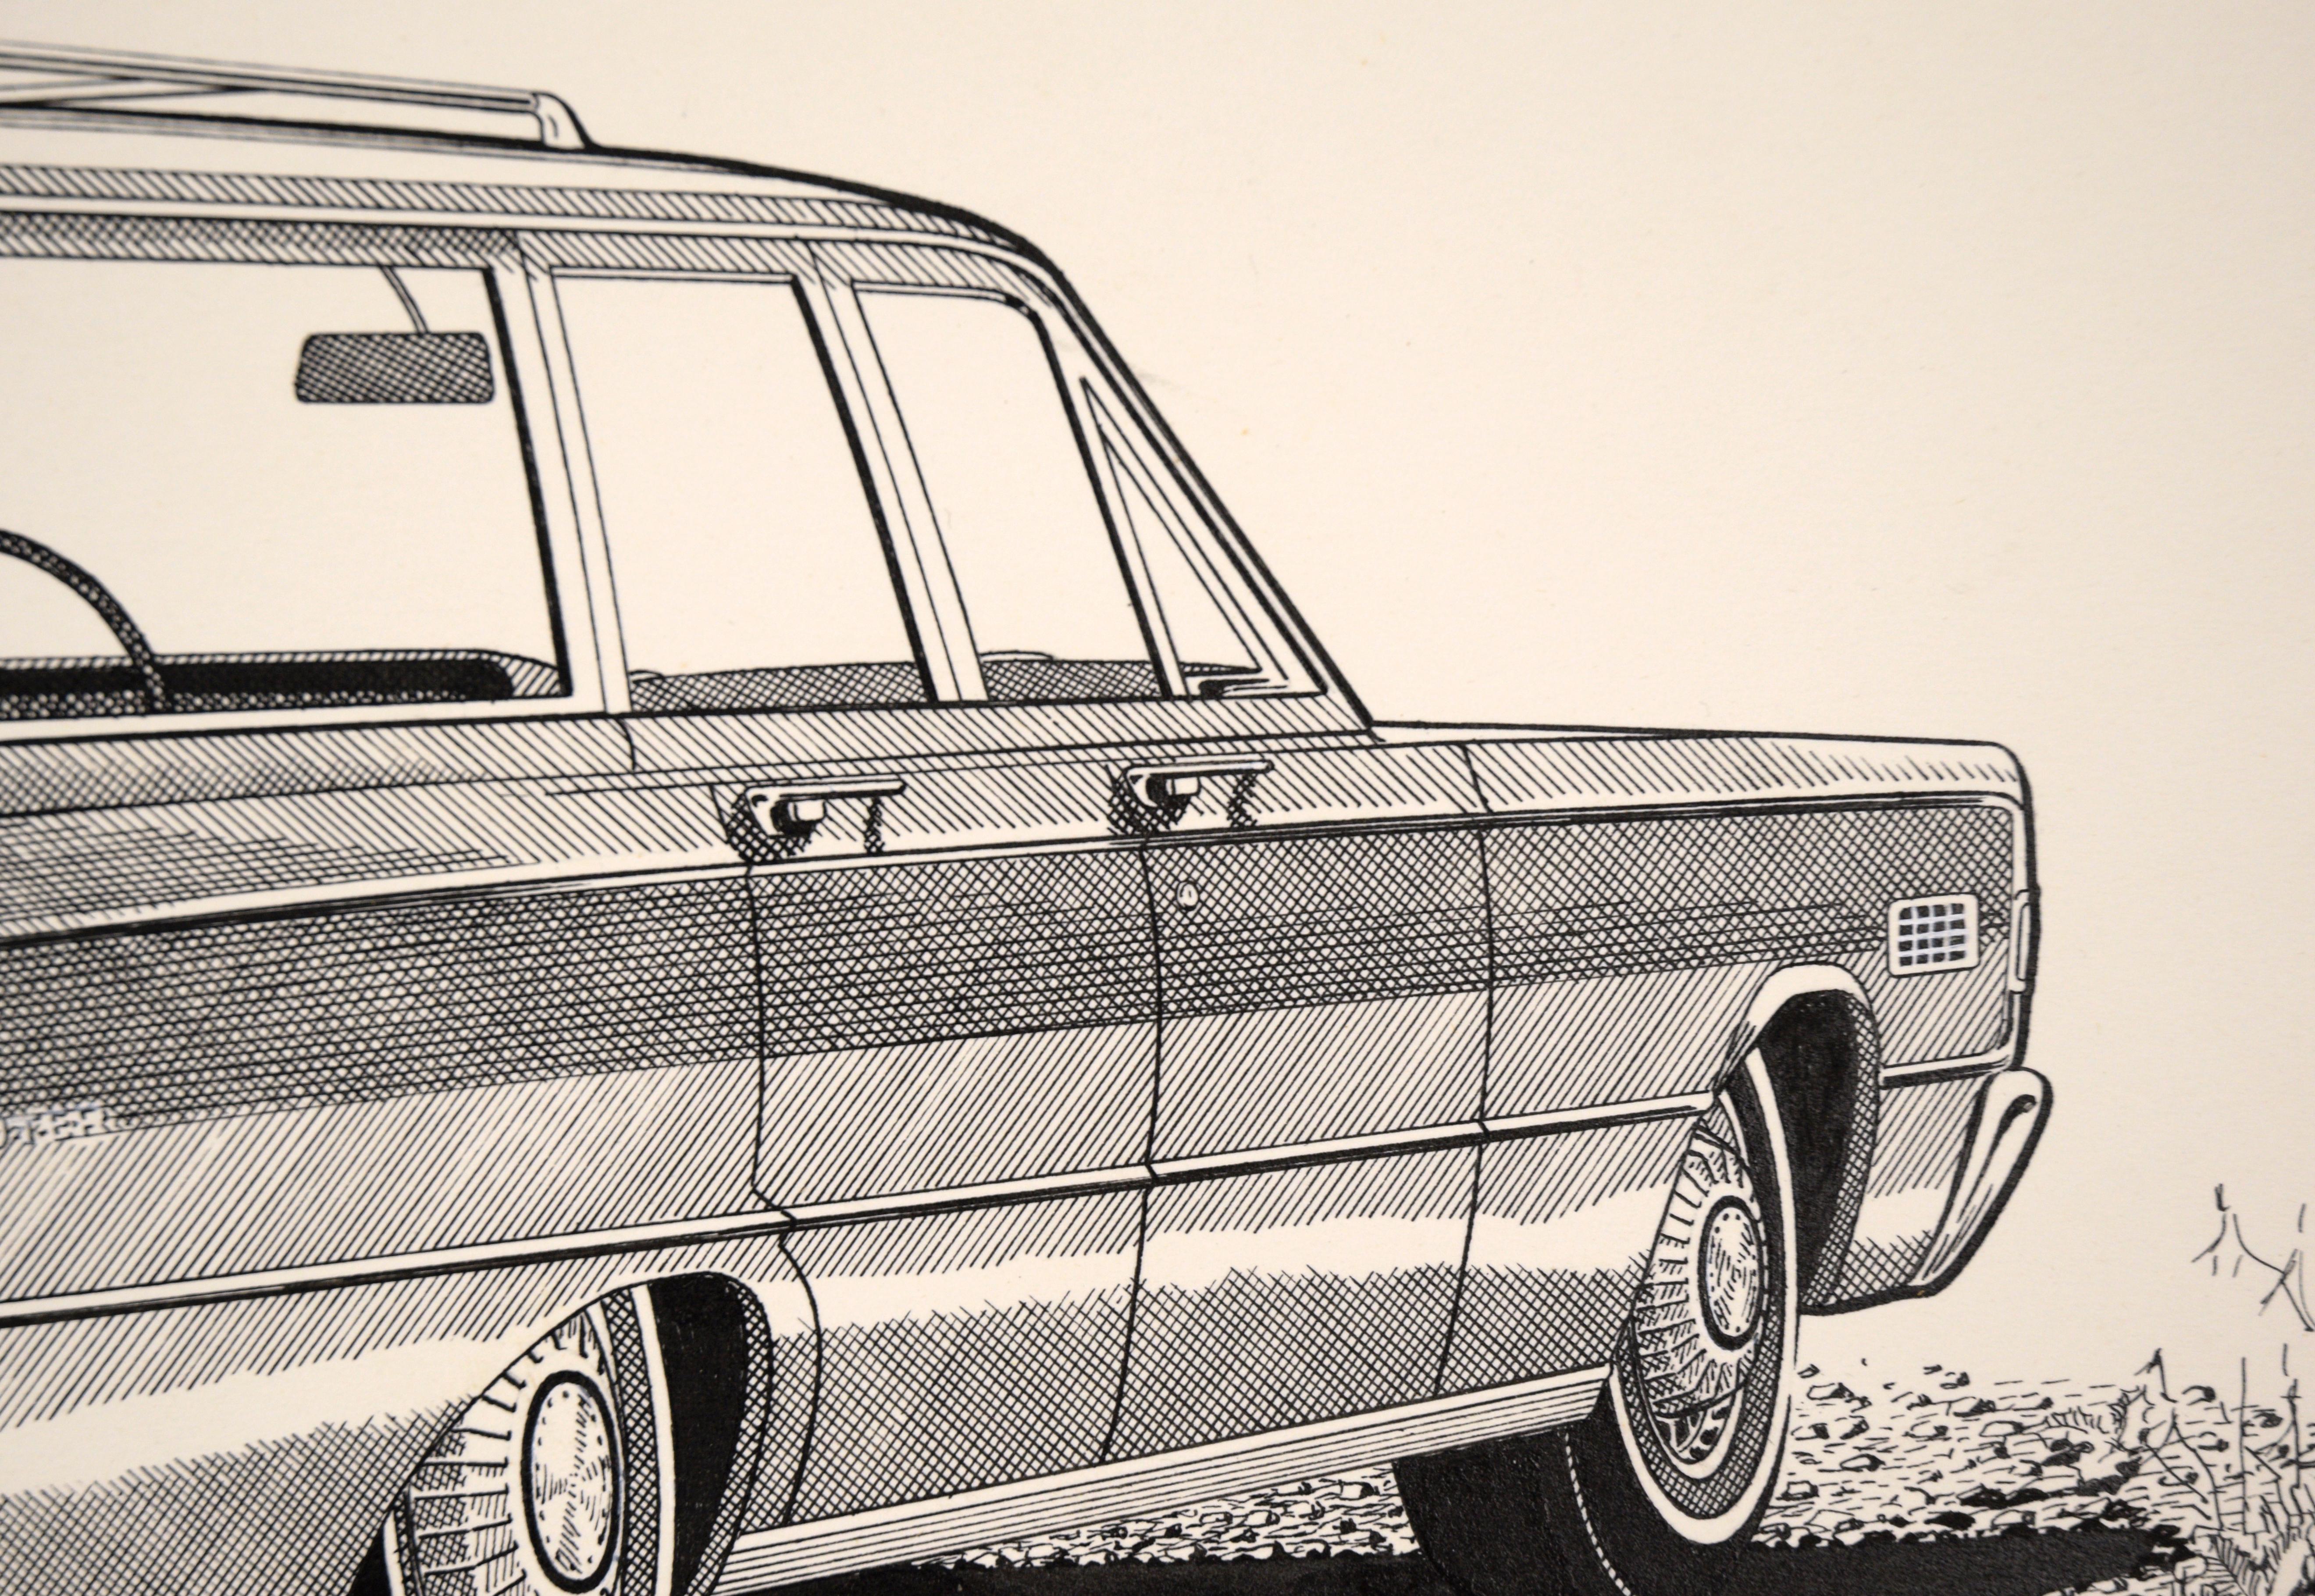 1966 Mercury Commuter Station Wagon, Antique Technical Car Illustration - Realist Art by Joseph Yeager